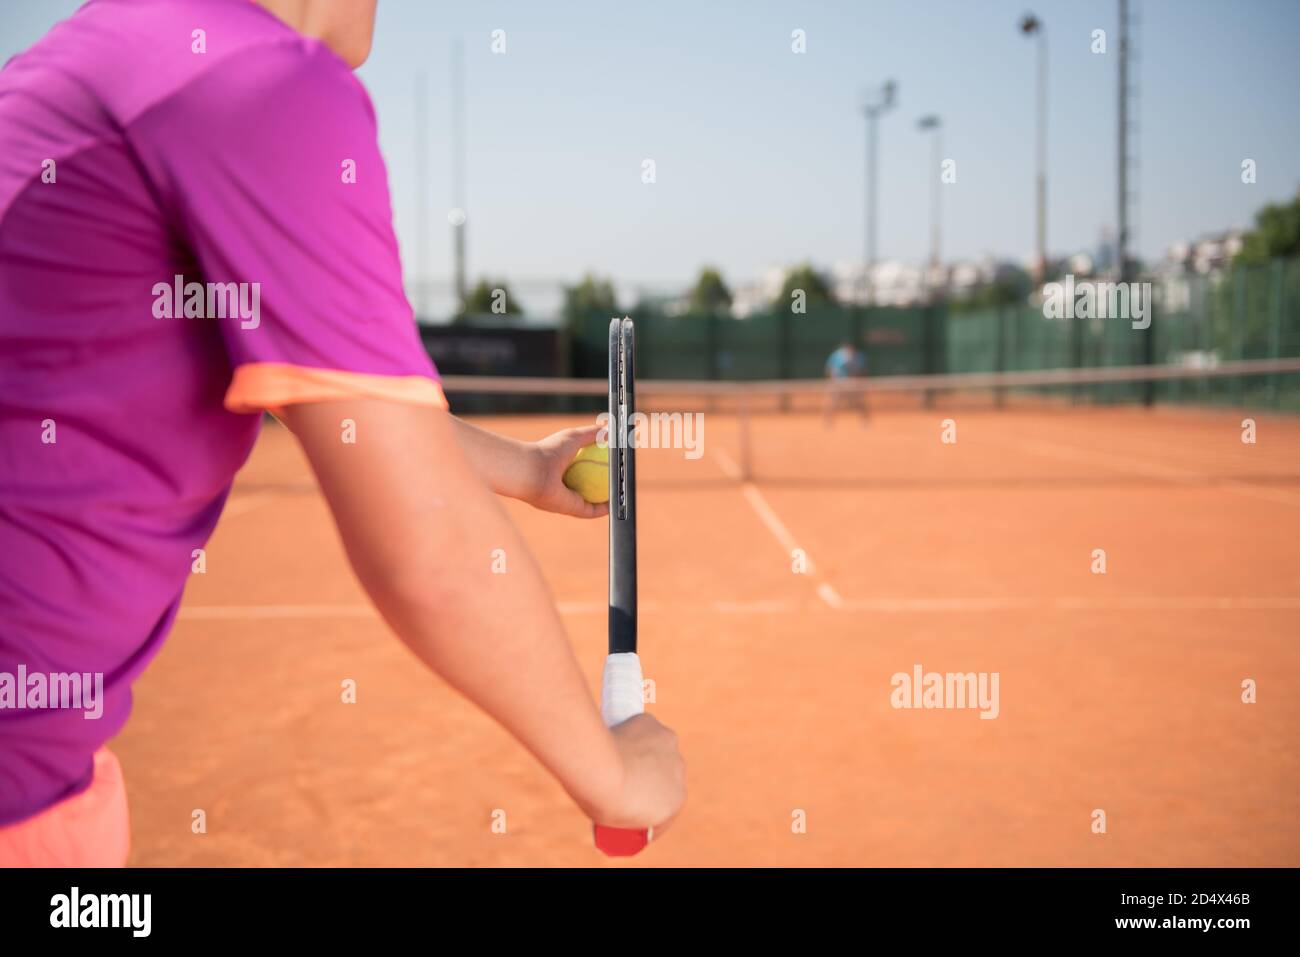 Young tennis player prepares for serving the ball Stock Photo